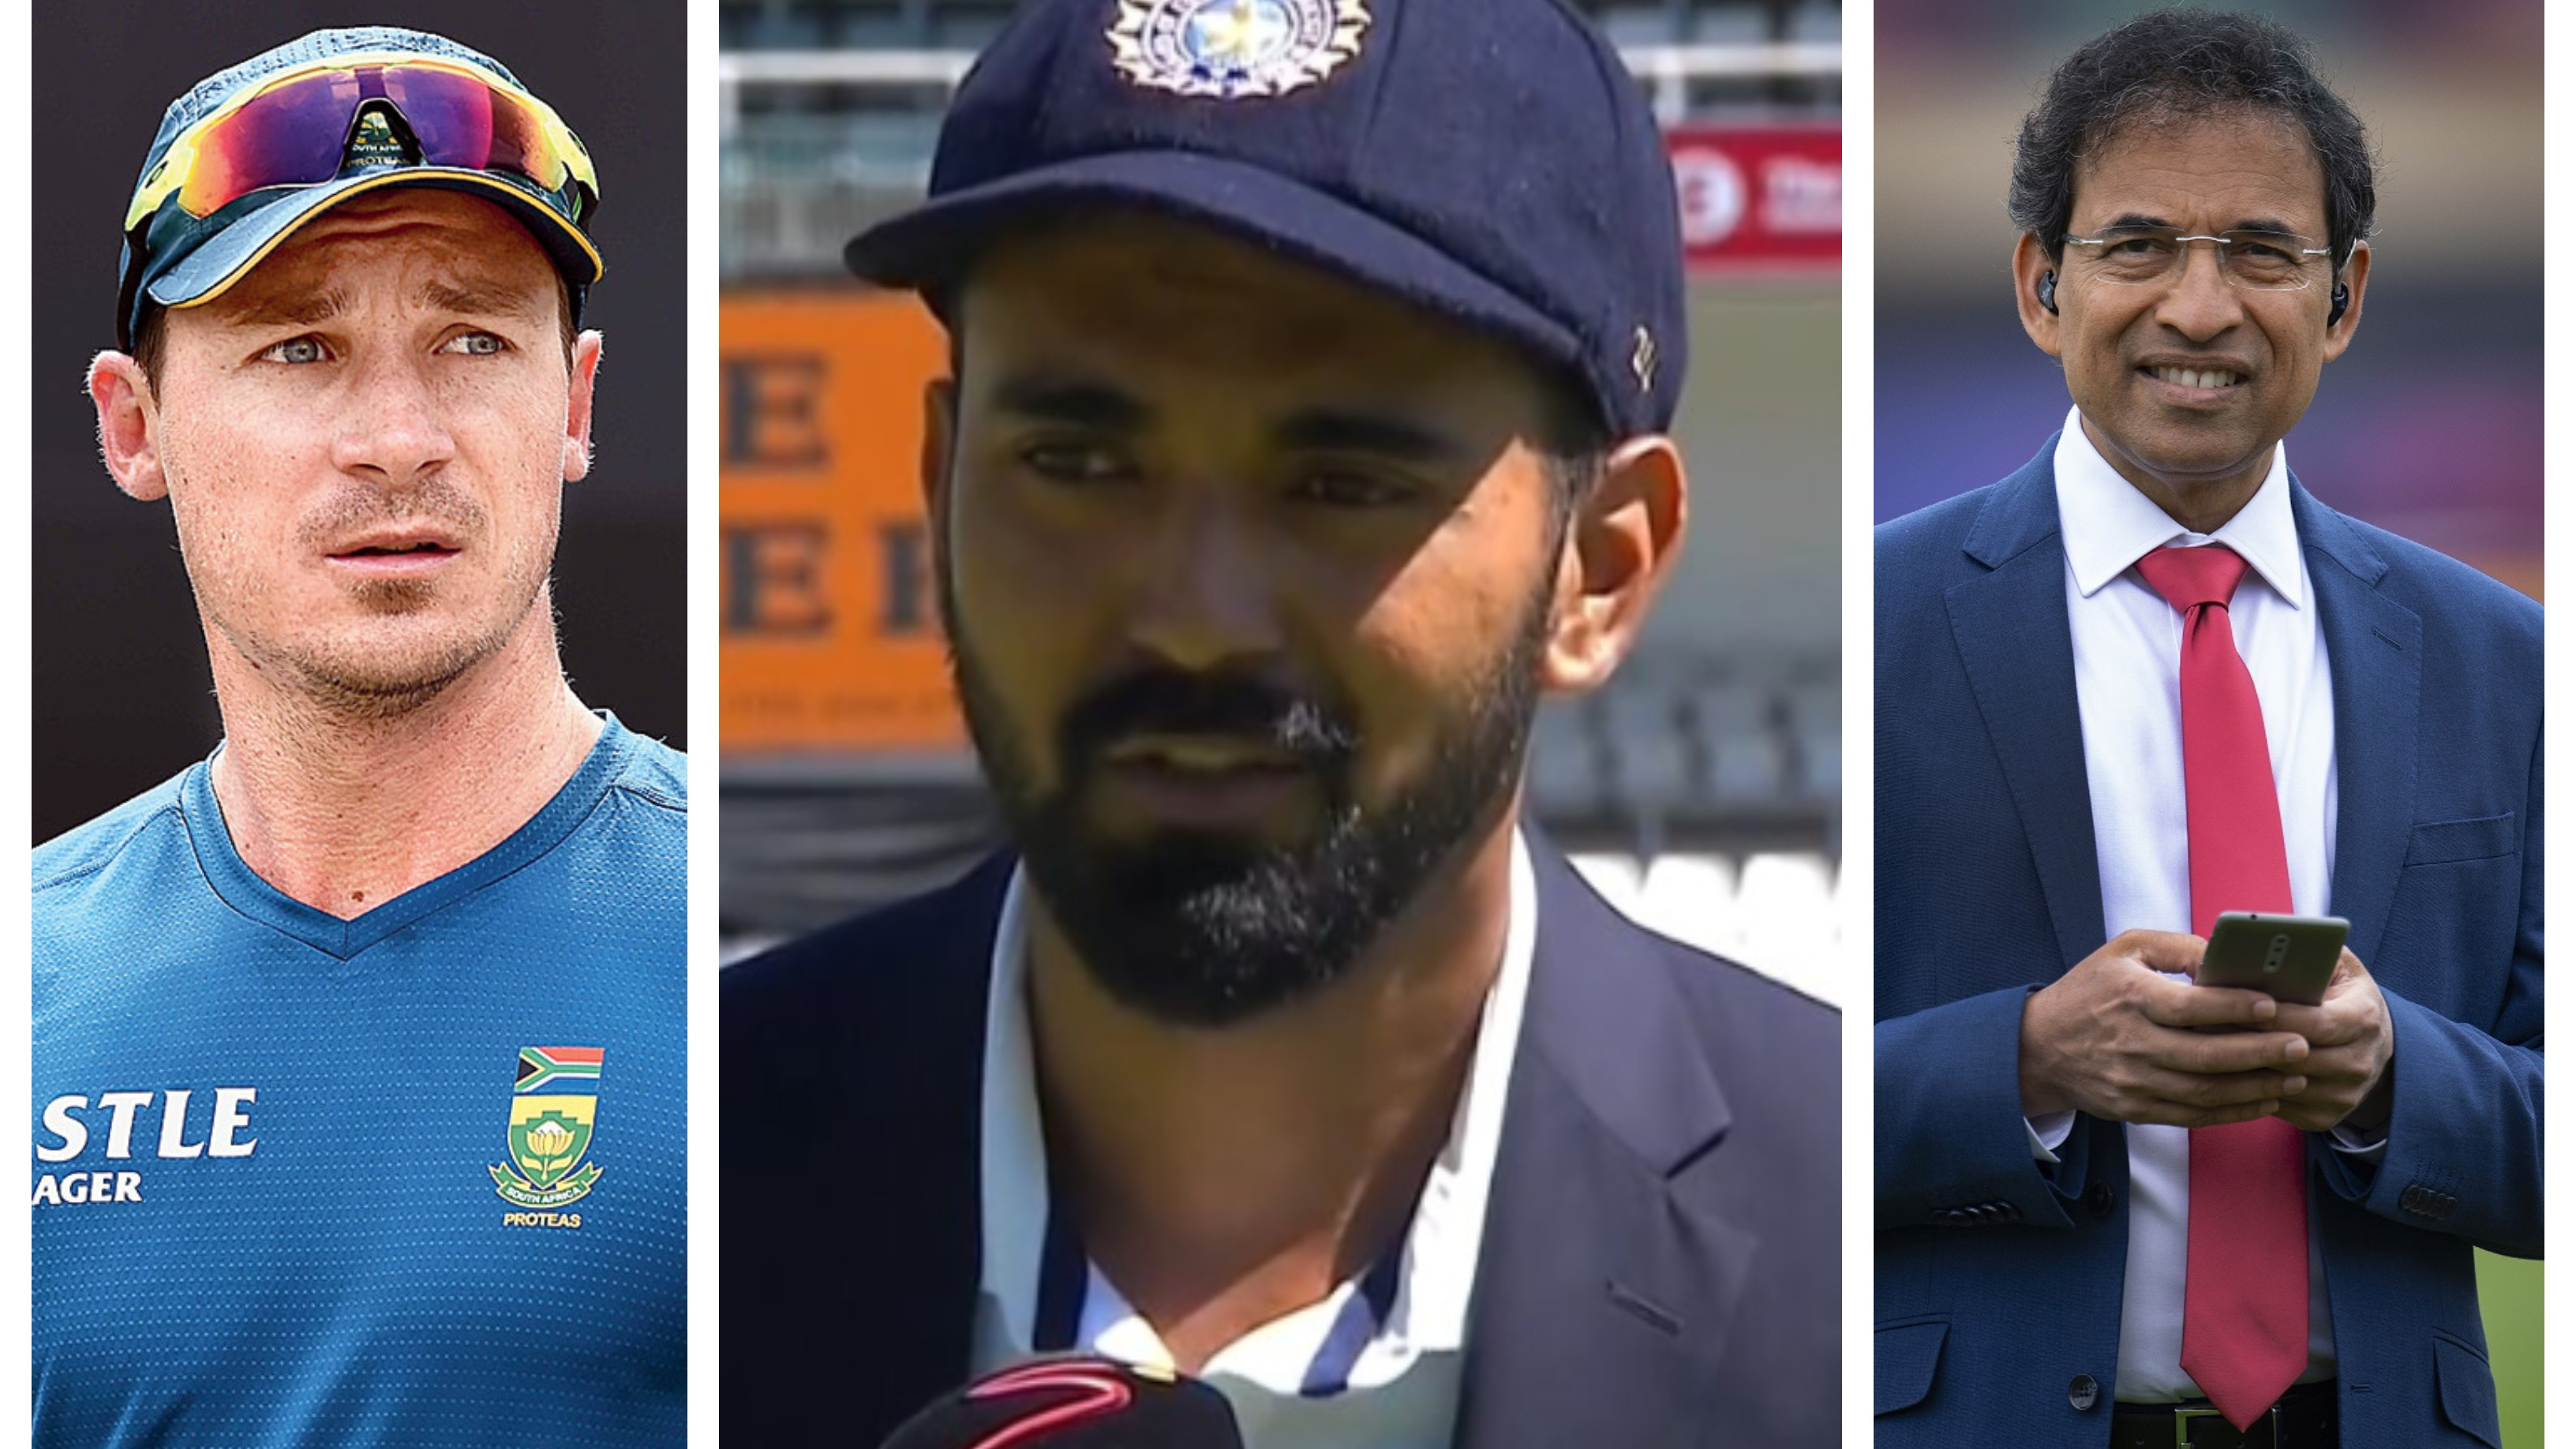 SA v IND 2021-22: Cricket fraternity reacts as KL Rahul leads India in 2nd Test with Kohli missing out due to back spasm